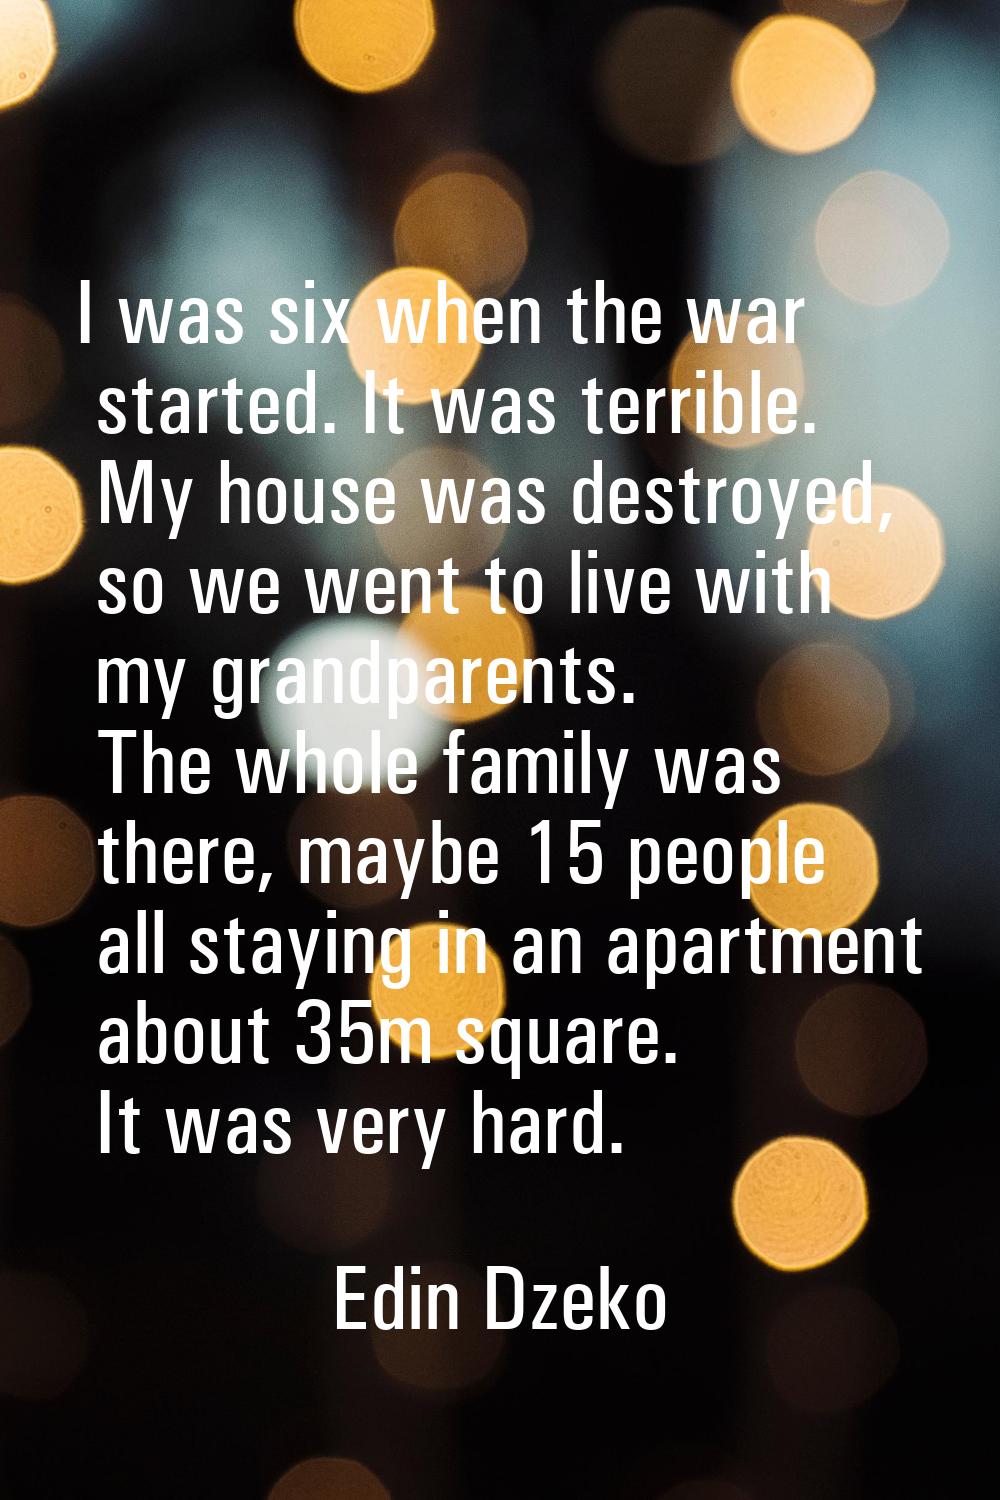 I was six when the war started. It was terrible. My house was destroyed, so we went to live with my